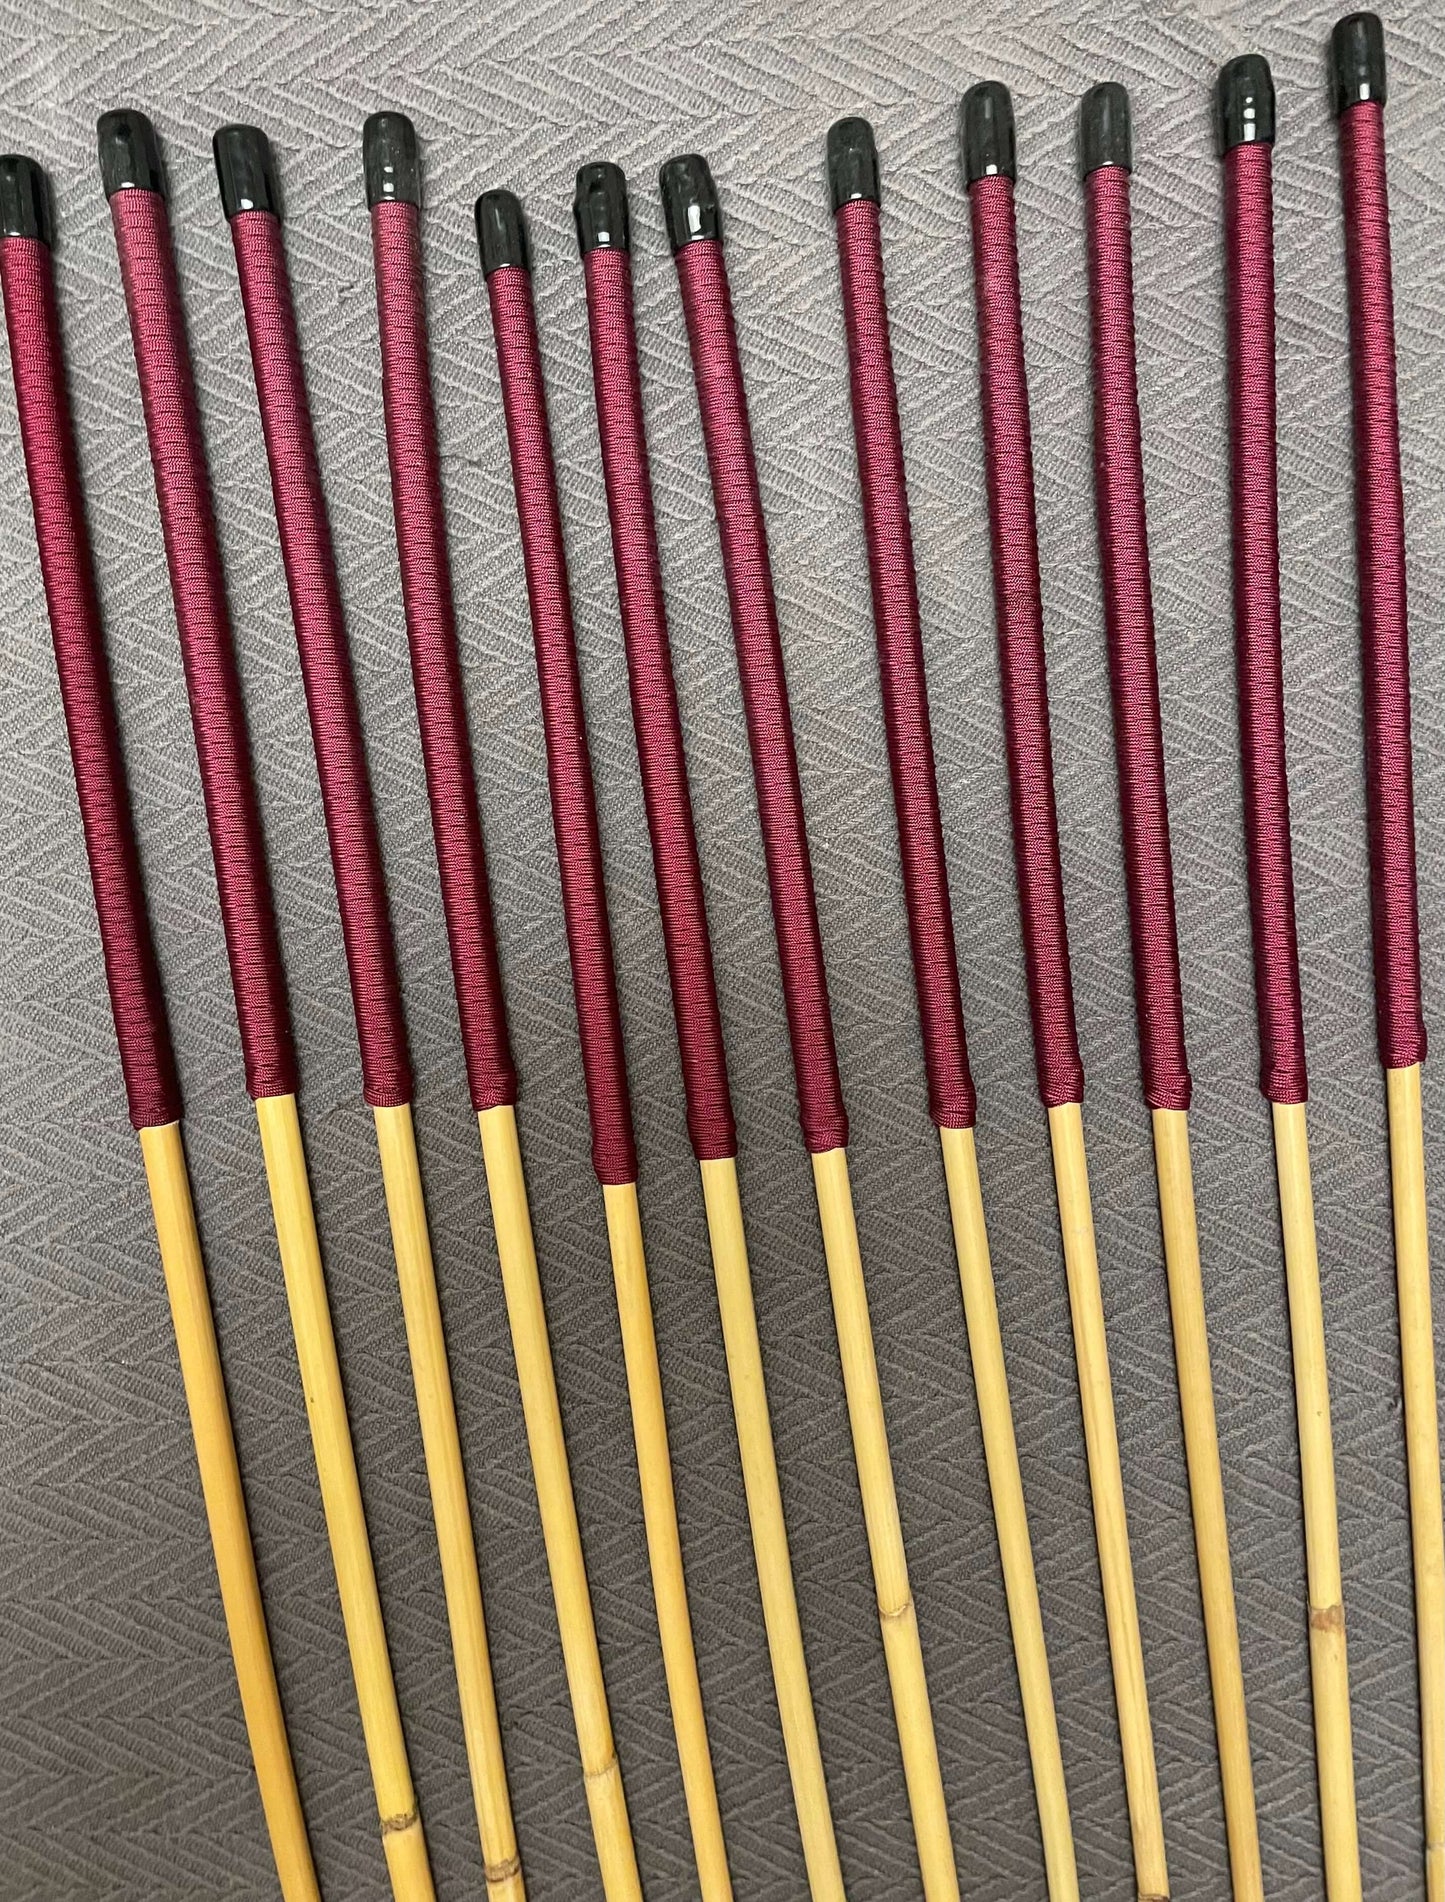 Dozen of the Best - Set of 12 Classic Dragon Rattan Punishment Canes / School Canes / BDSM Whipping Canes - 95-100 cms L - Imperial Red OR Burgundy Paracord Handles